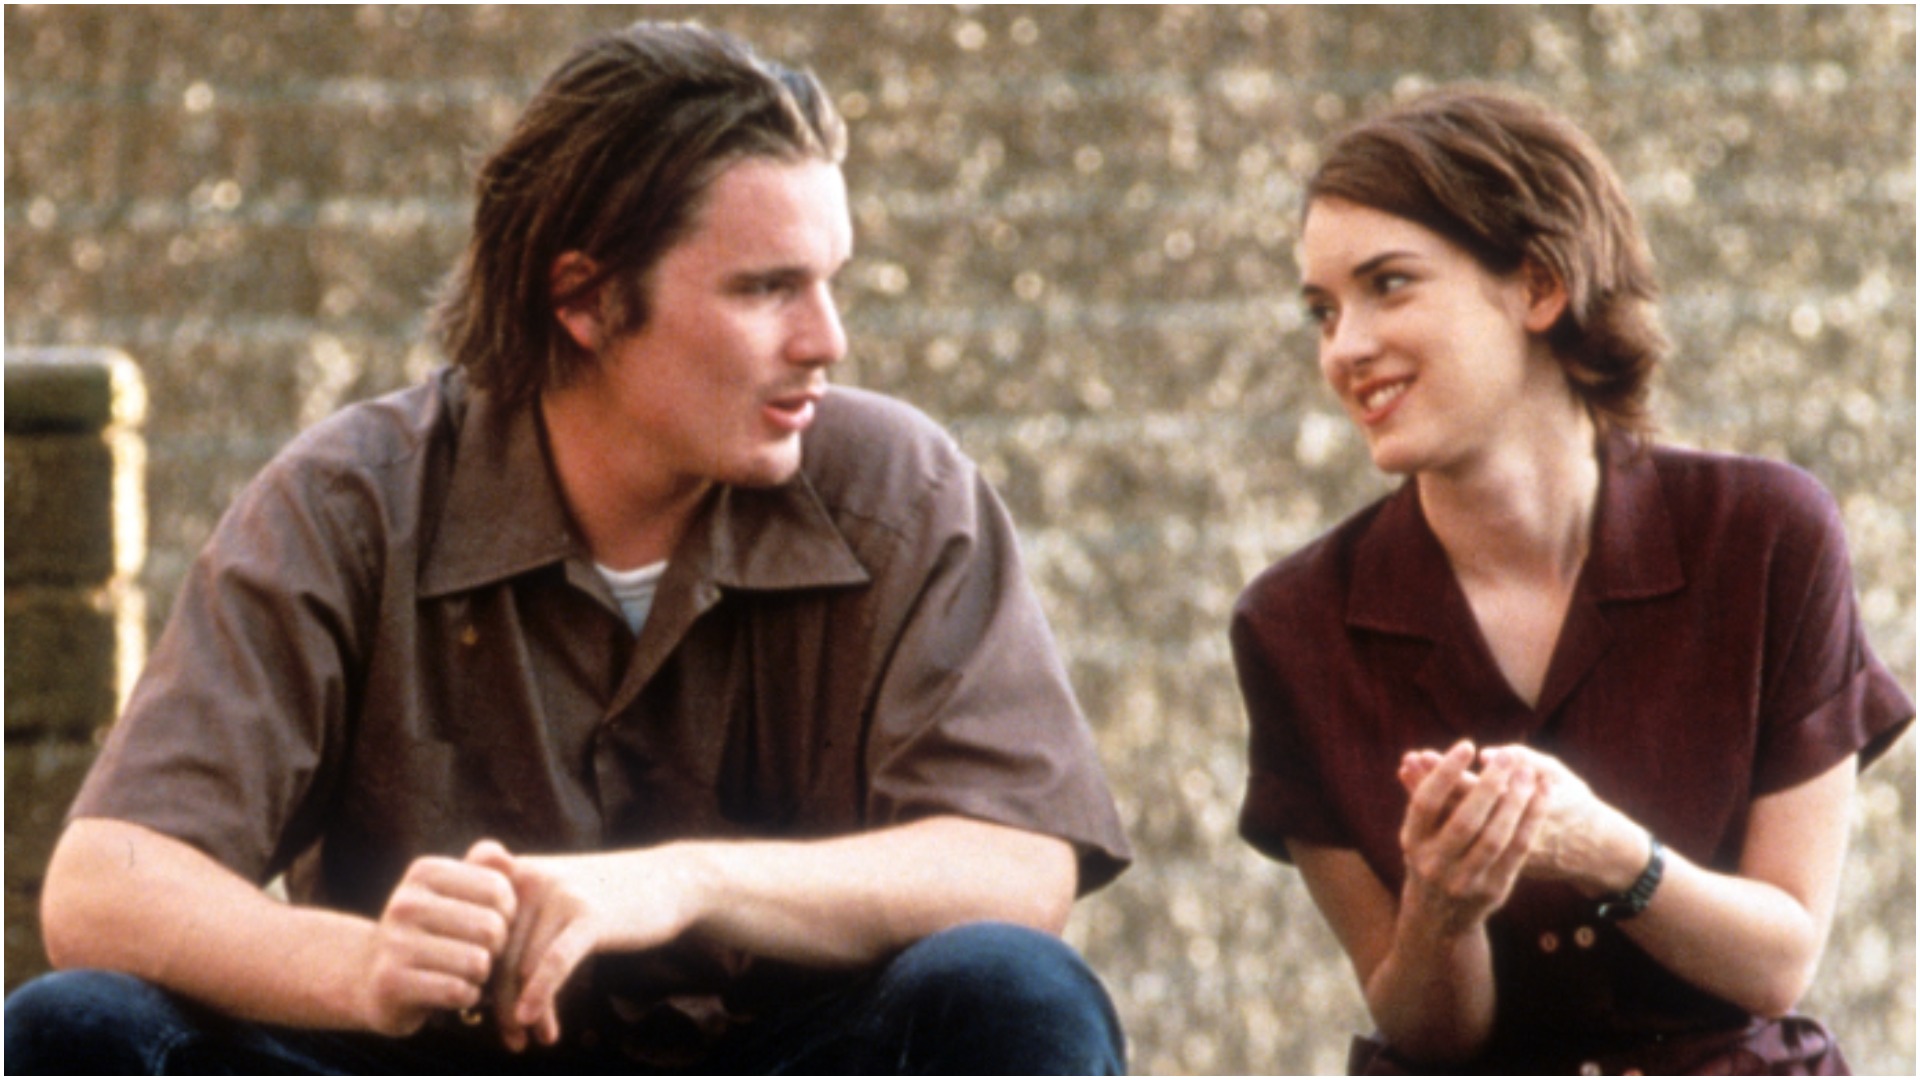 Reality Bites scene with Ethan Hawke and Winona Ryder